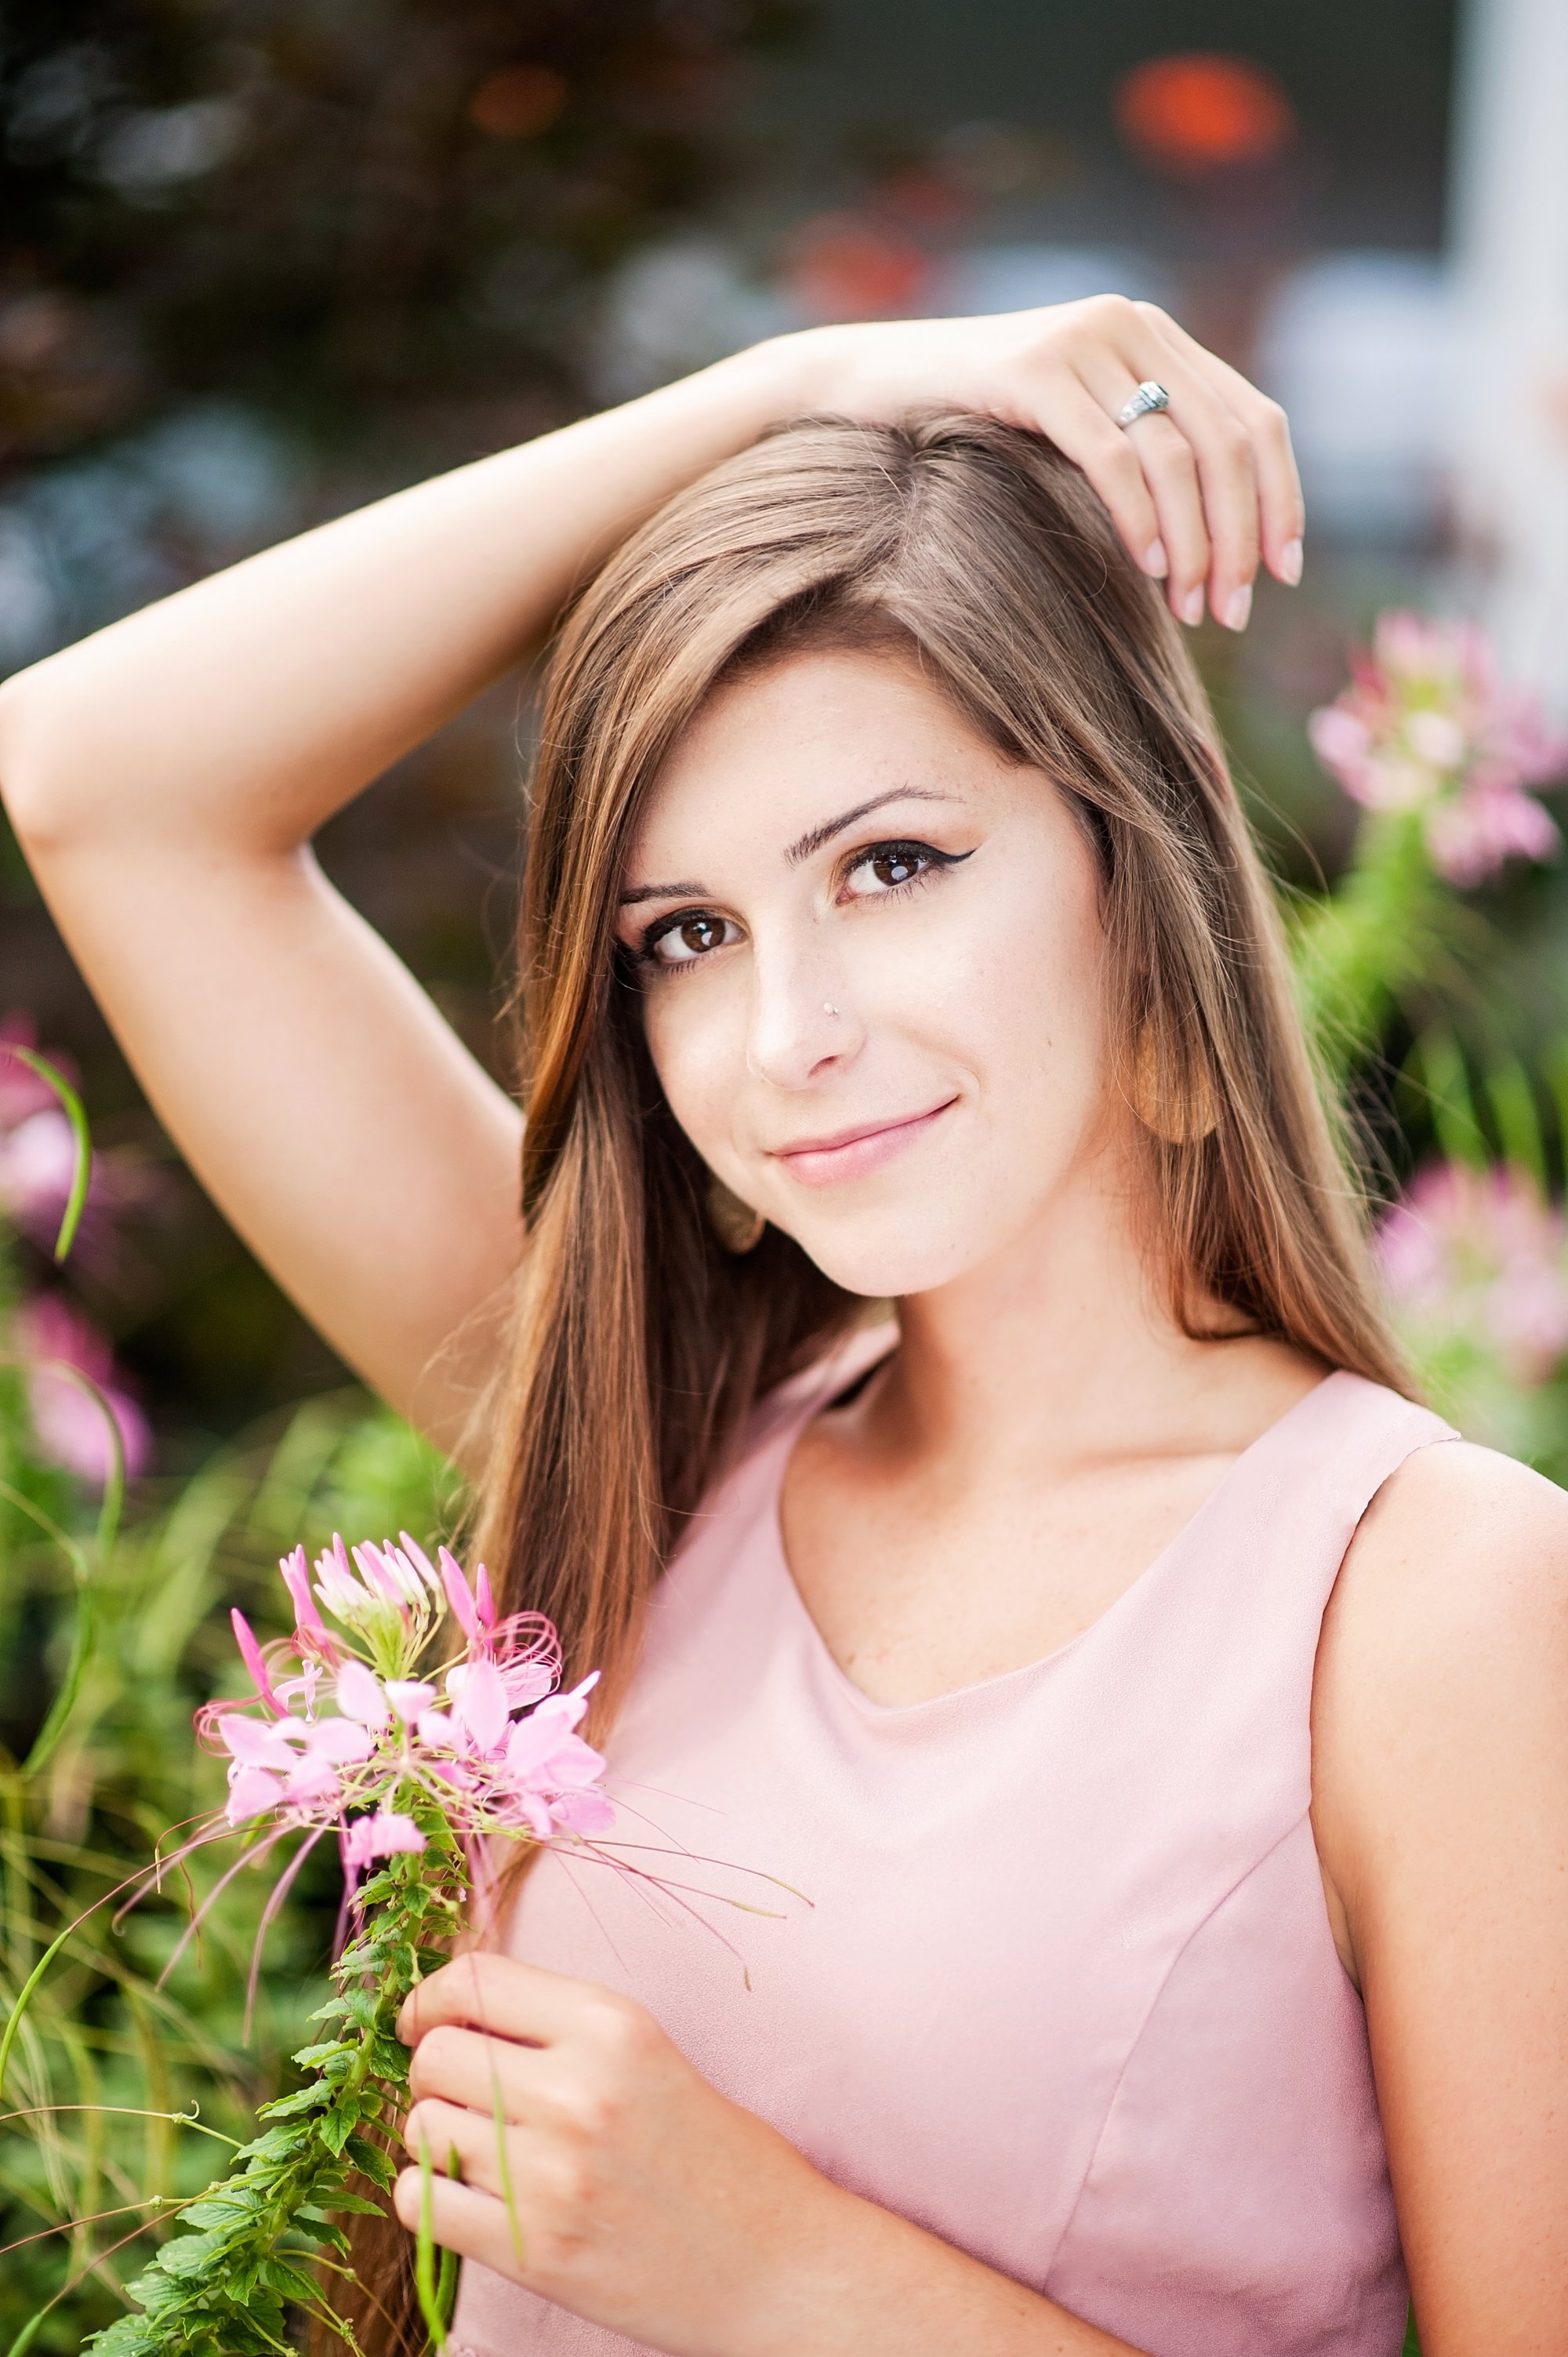 senior girl portrait session with pink dress and pink flowers, richmond virginia senior pictures at amber grove